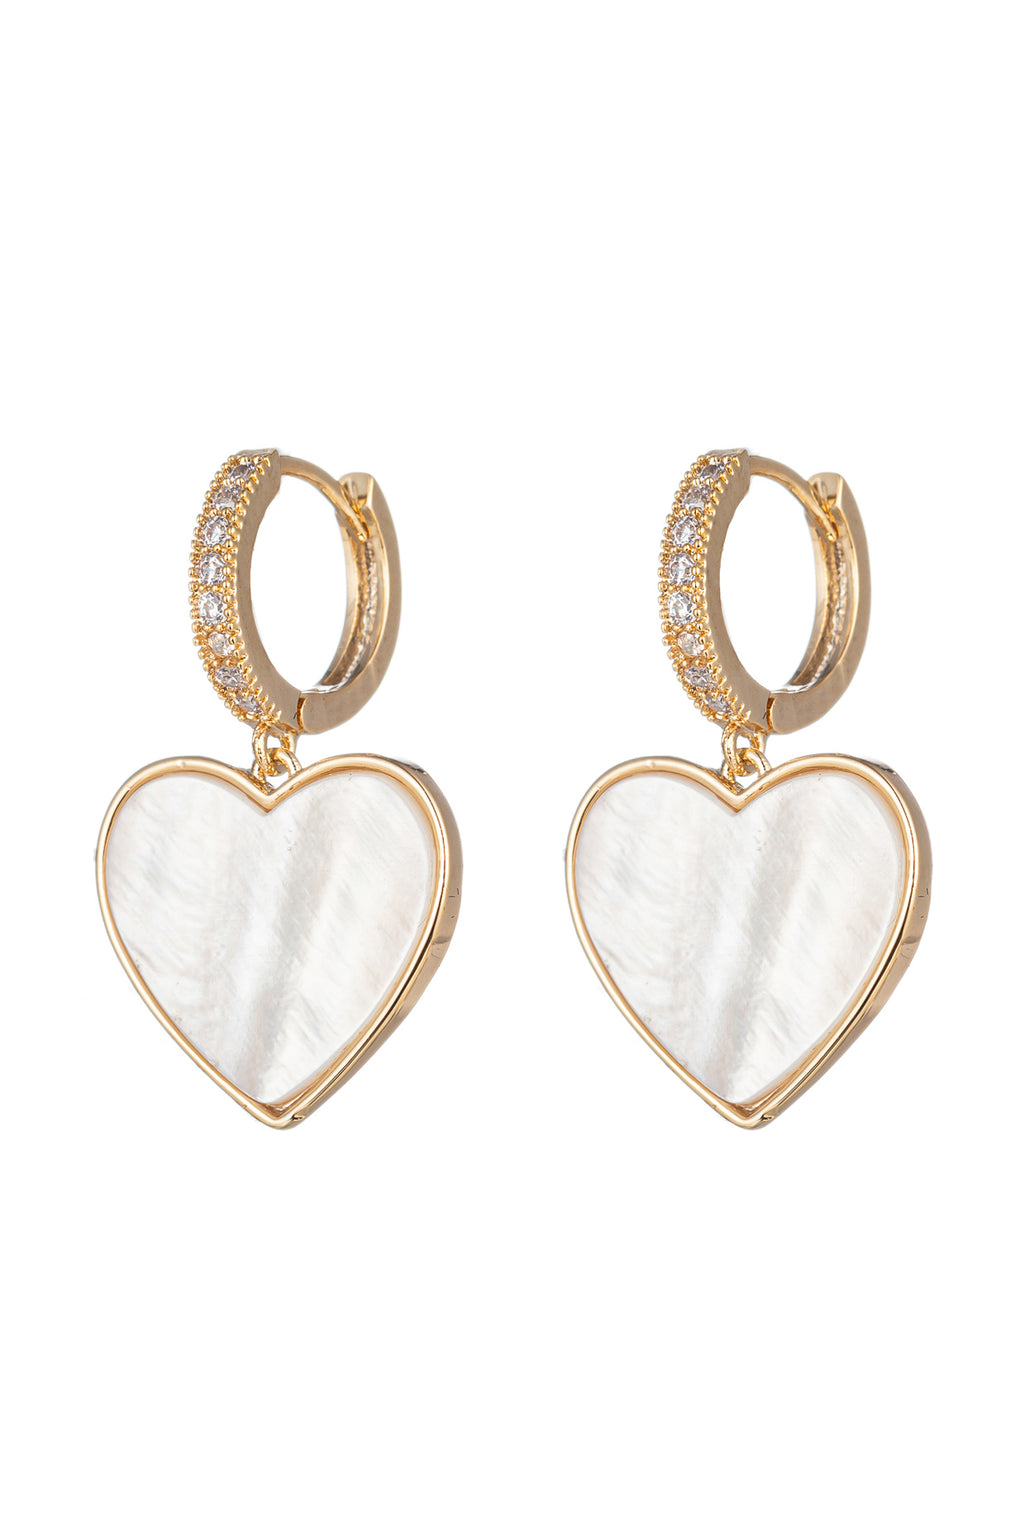 Gold tone brass heart huggie earrings made with shell pearls.